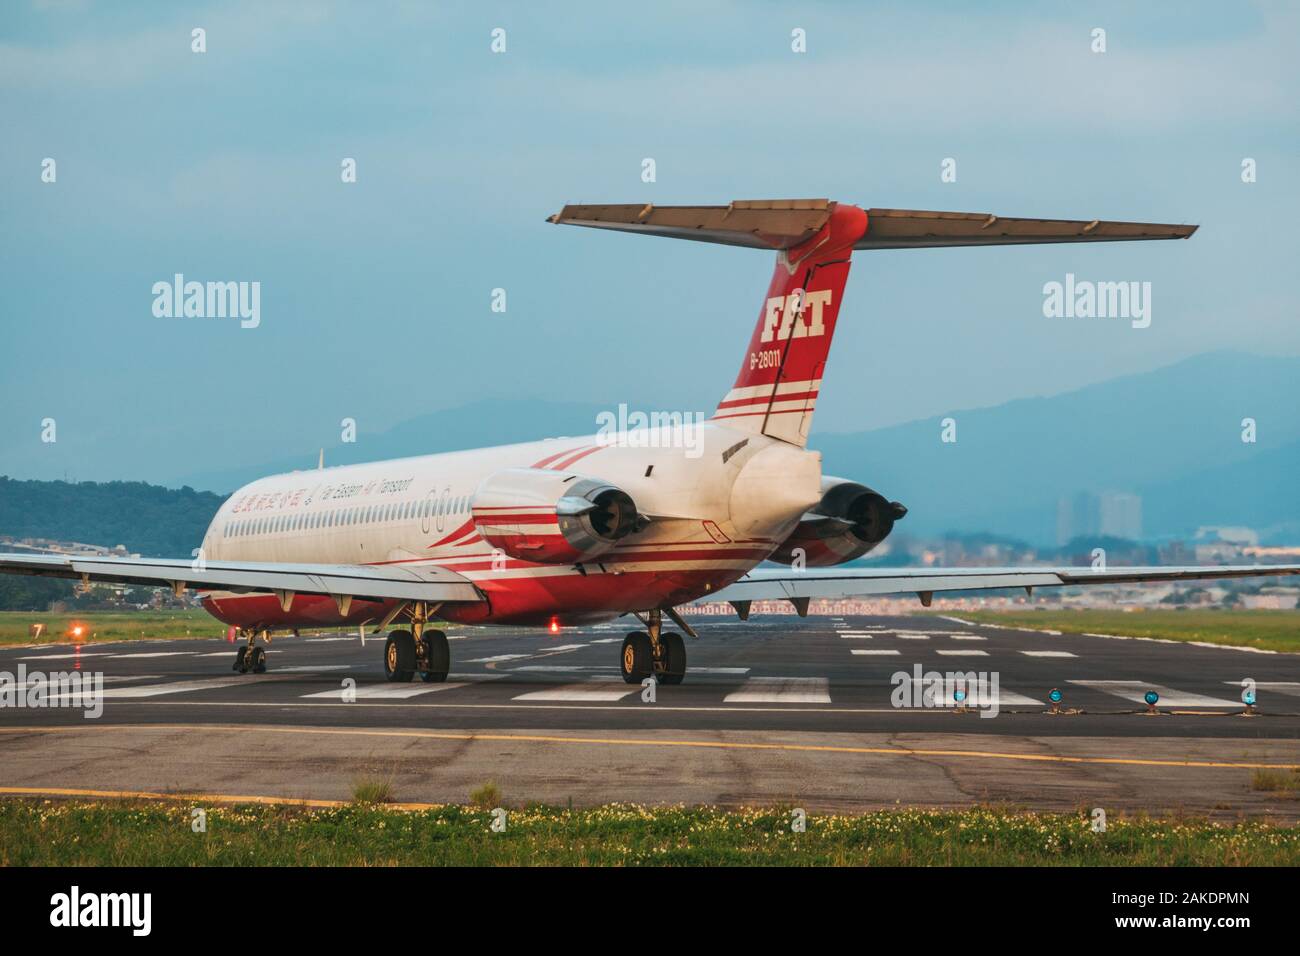 A McDonnell Douglas MD-83, of the now-defunct Far Eastern Air Transport, lines up for takeoff on Songshan Airport's runway one evening Stock Photo